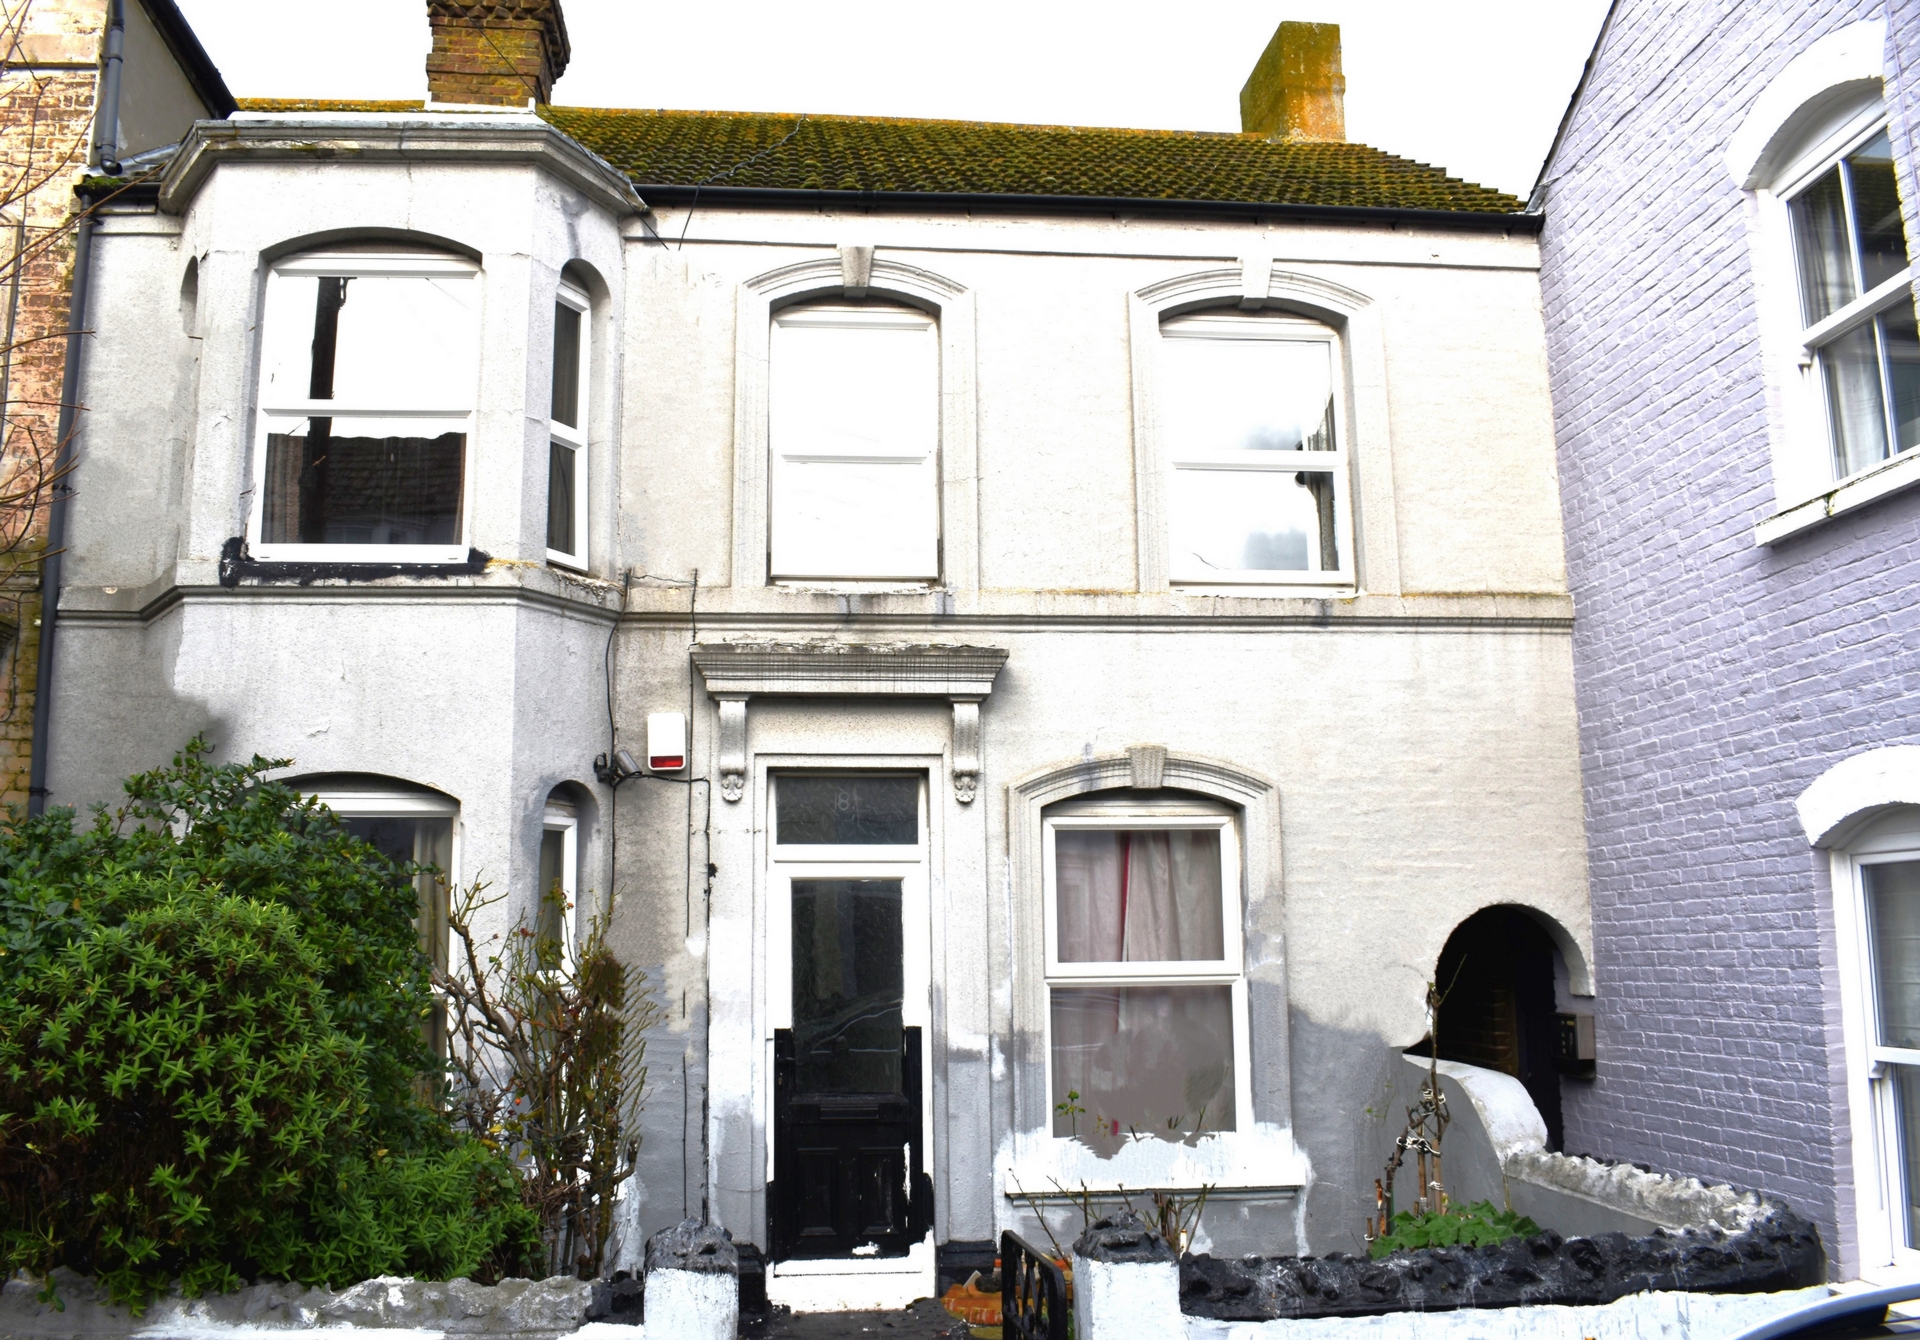 Period Property - 3/4 bedrooms in need of full refurbishment which is reflected in the asking price perfectly placed in the heart of Broadstairs!